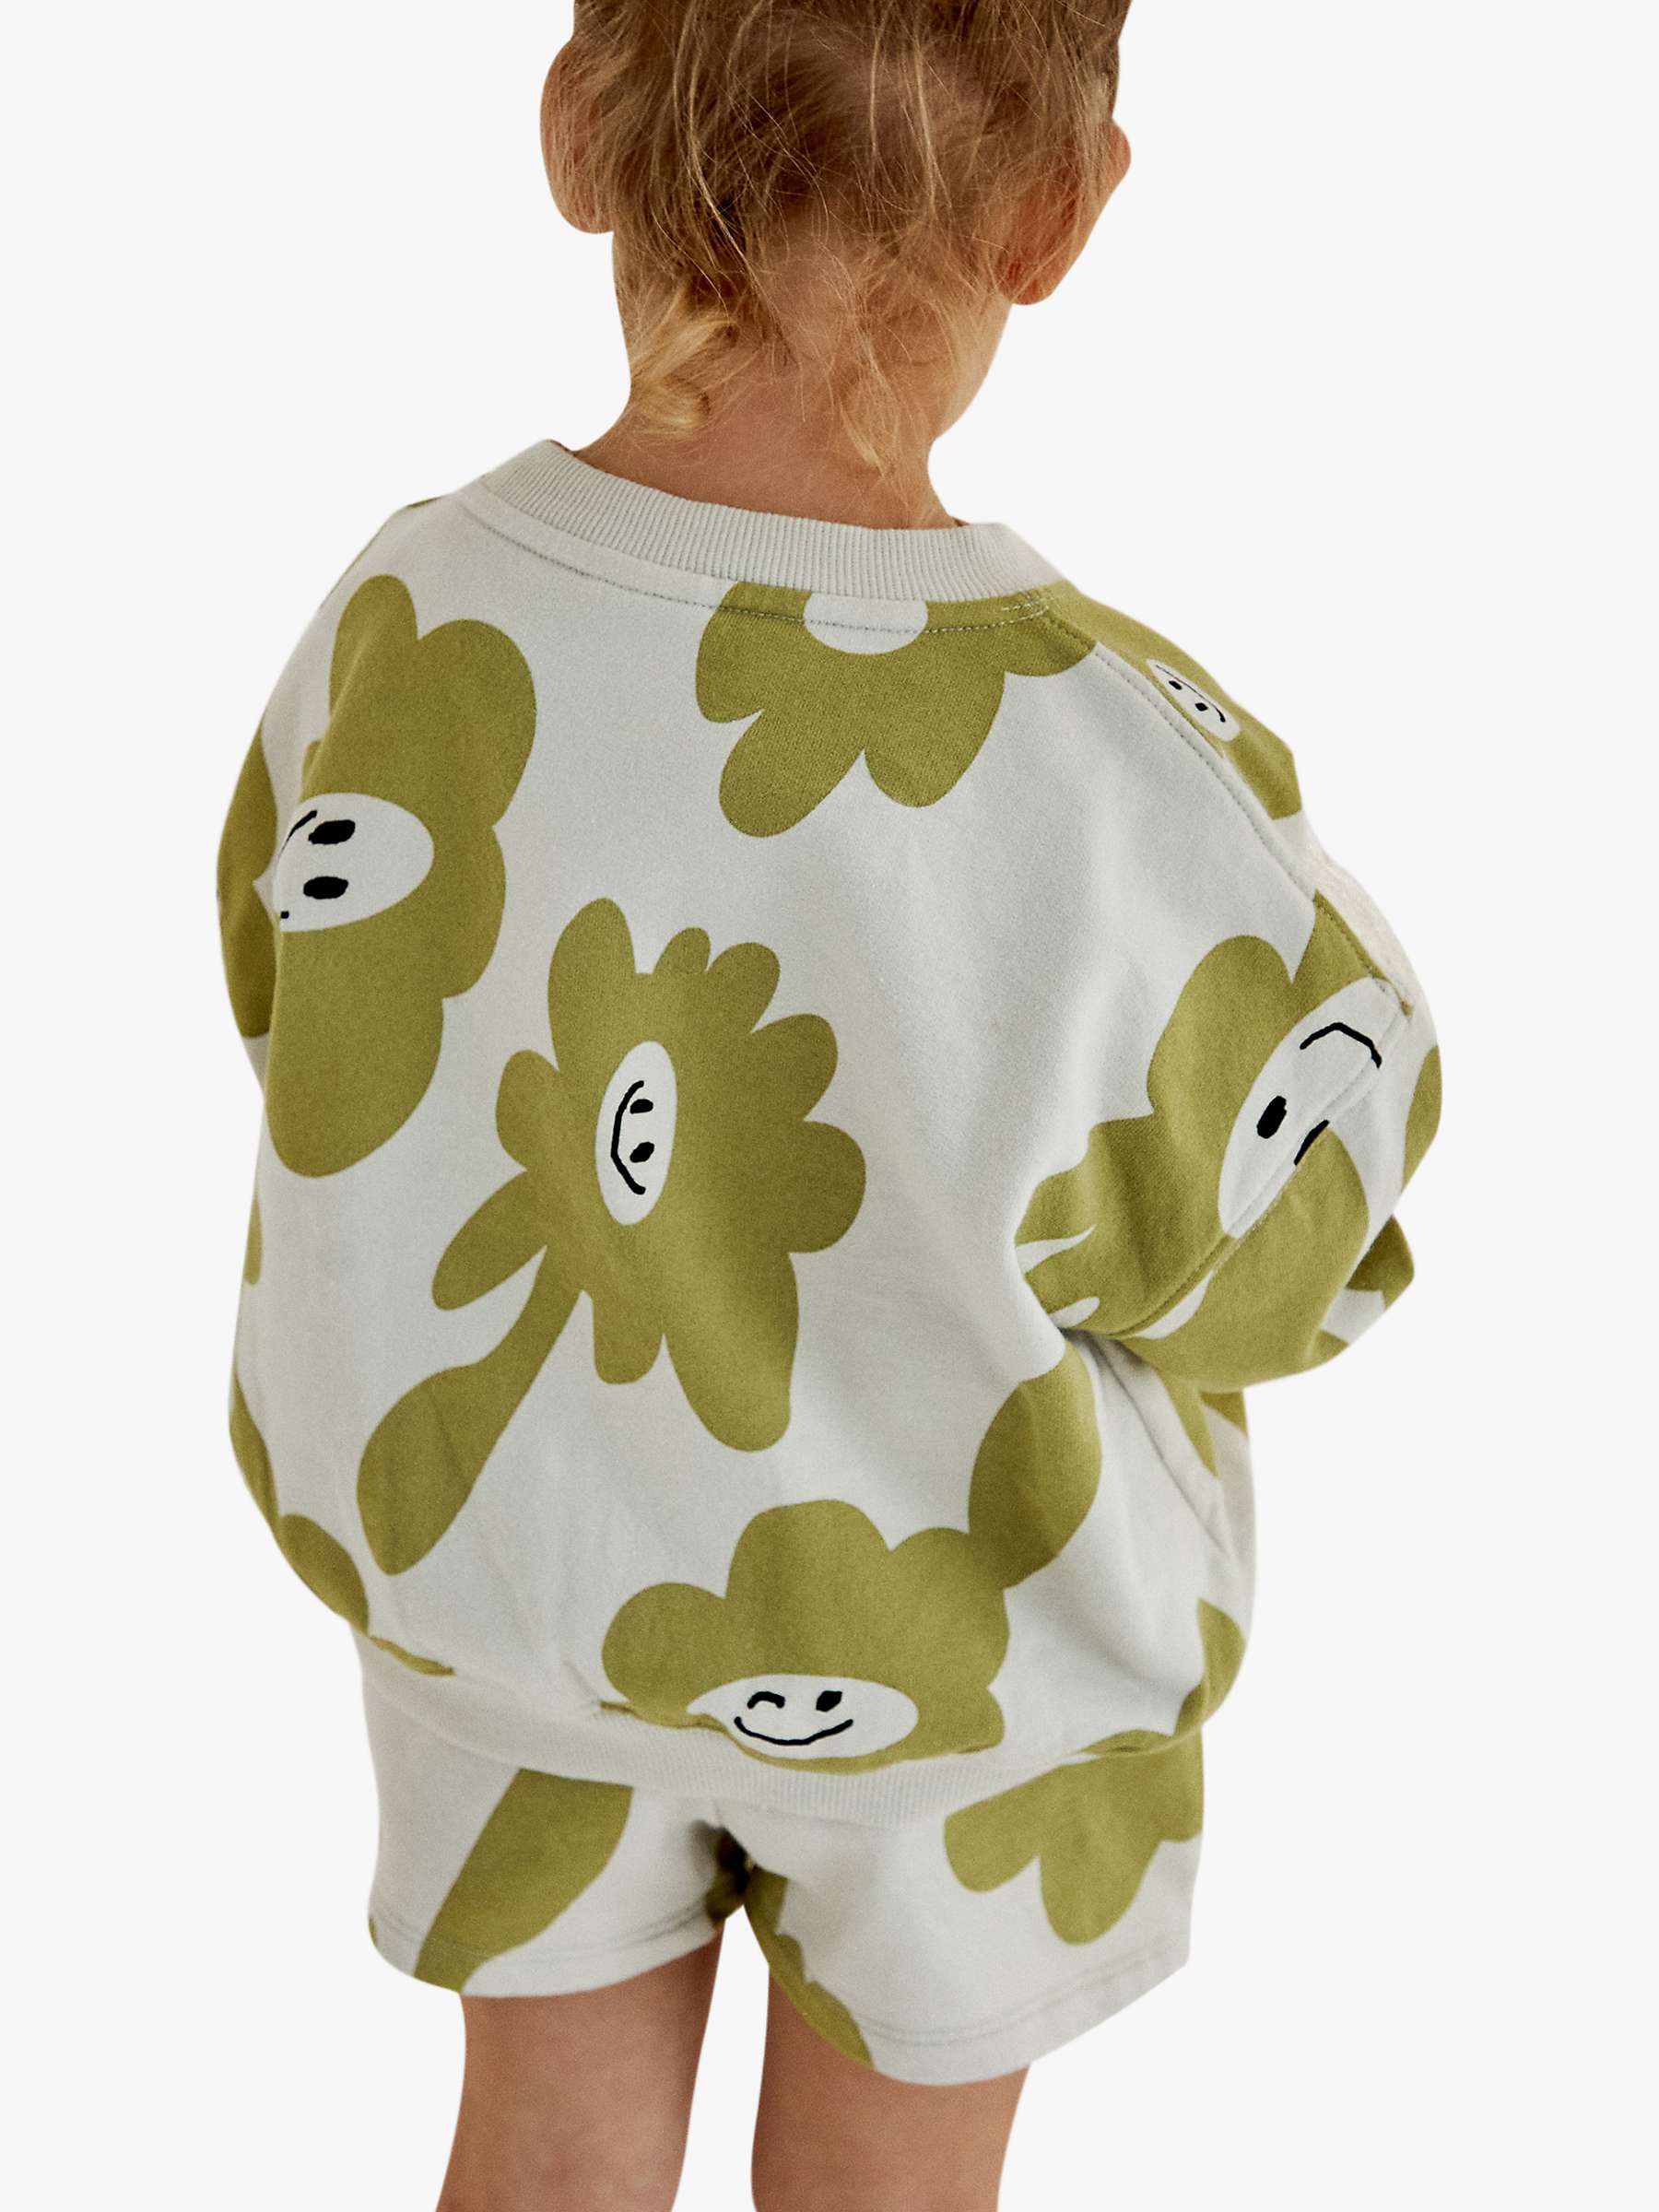 Buy Claude & Co Baby Organic Cotton Smiley Splodge Jumper, Green/Multi Online at johnlewis.com